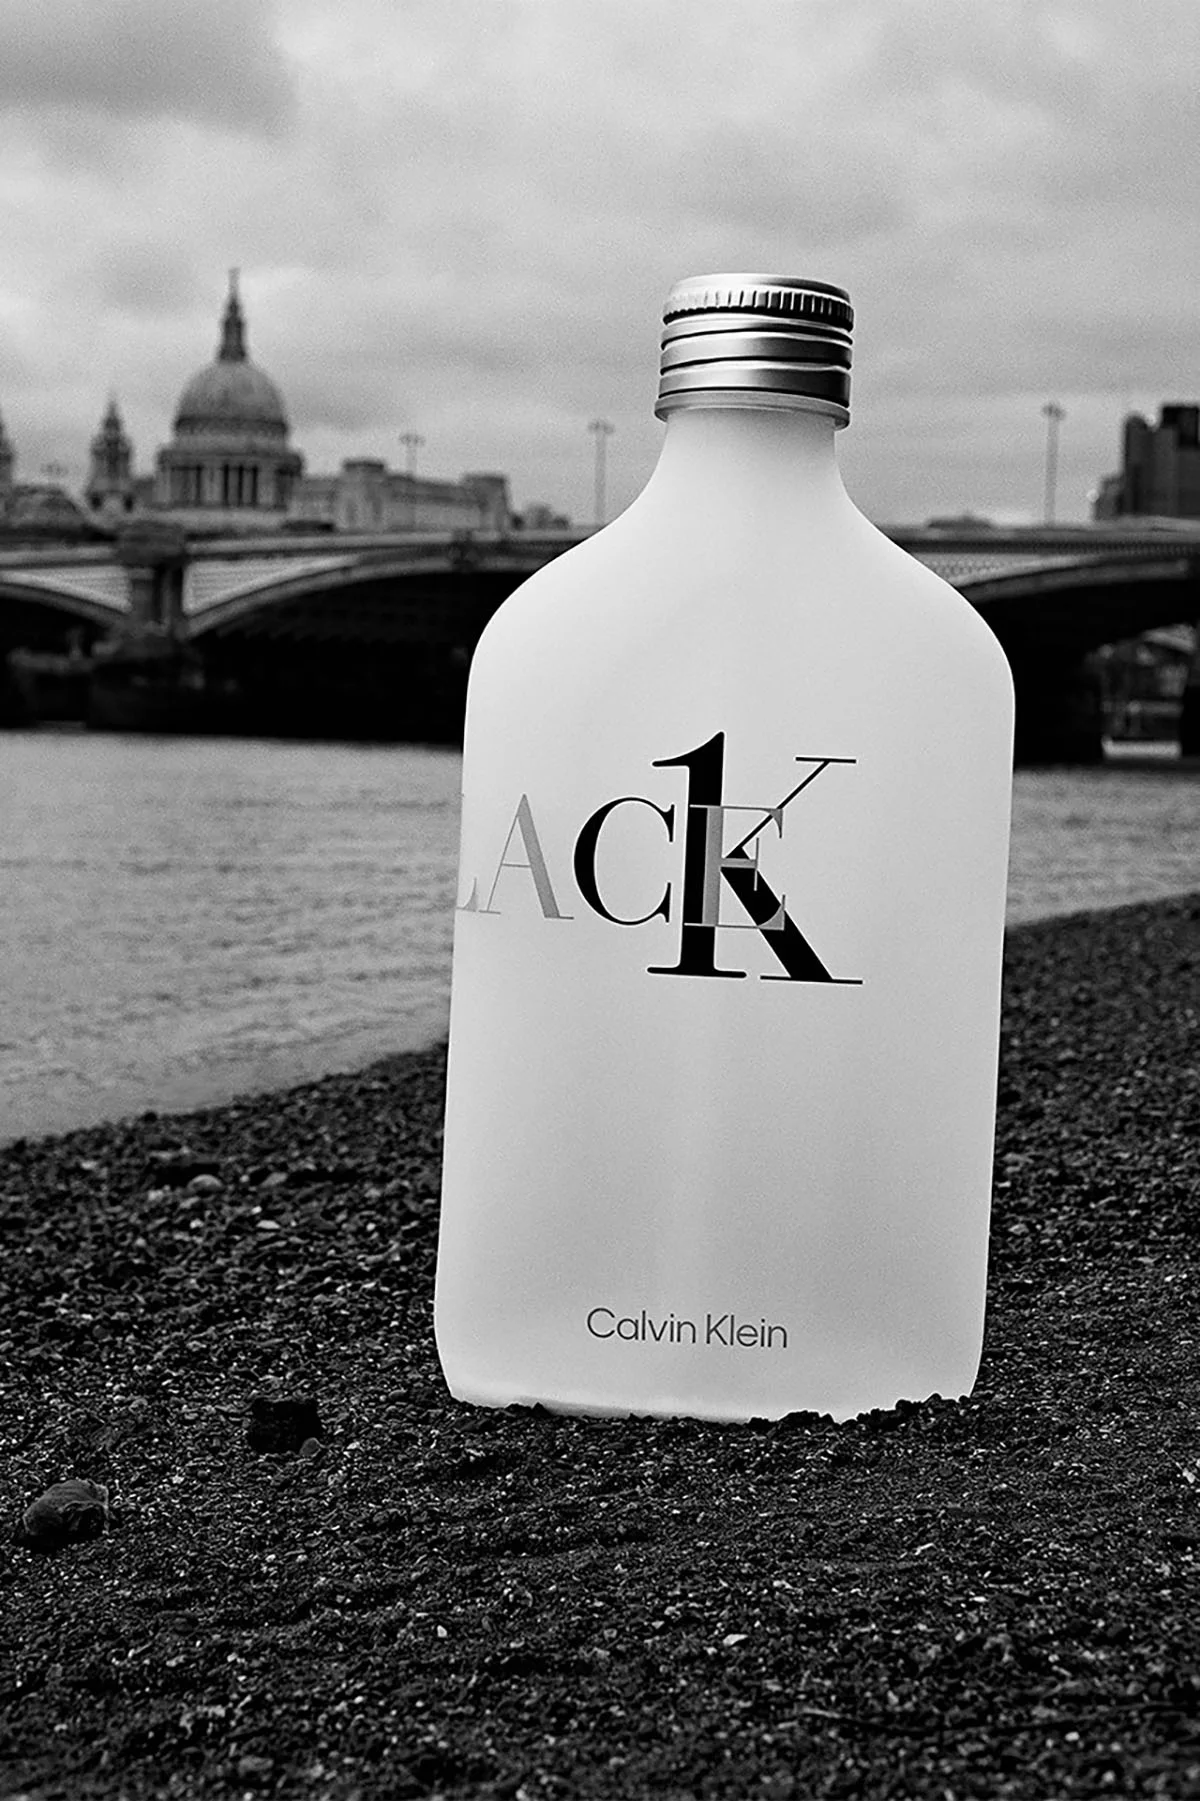 Calvin Klein and Palace co-sign a capsule and a unisex fragrance